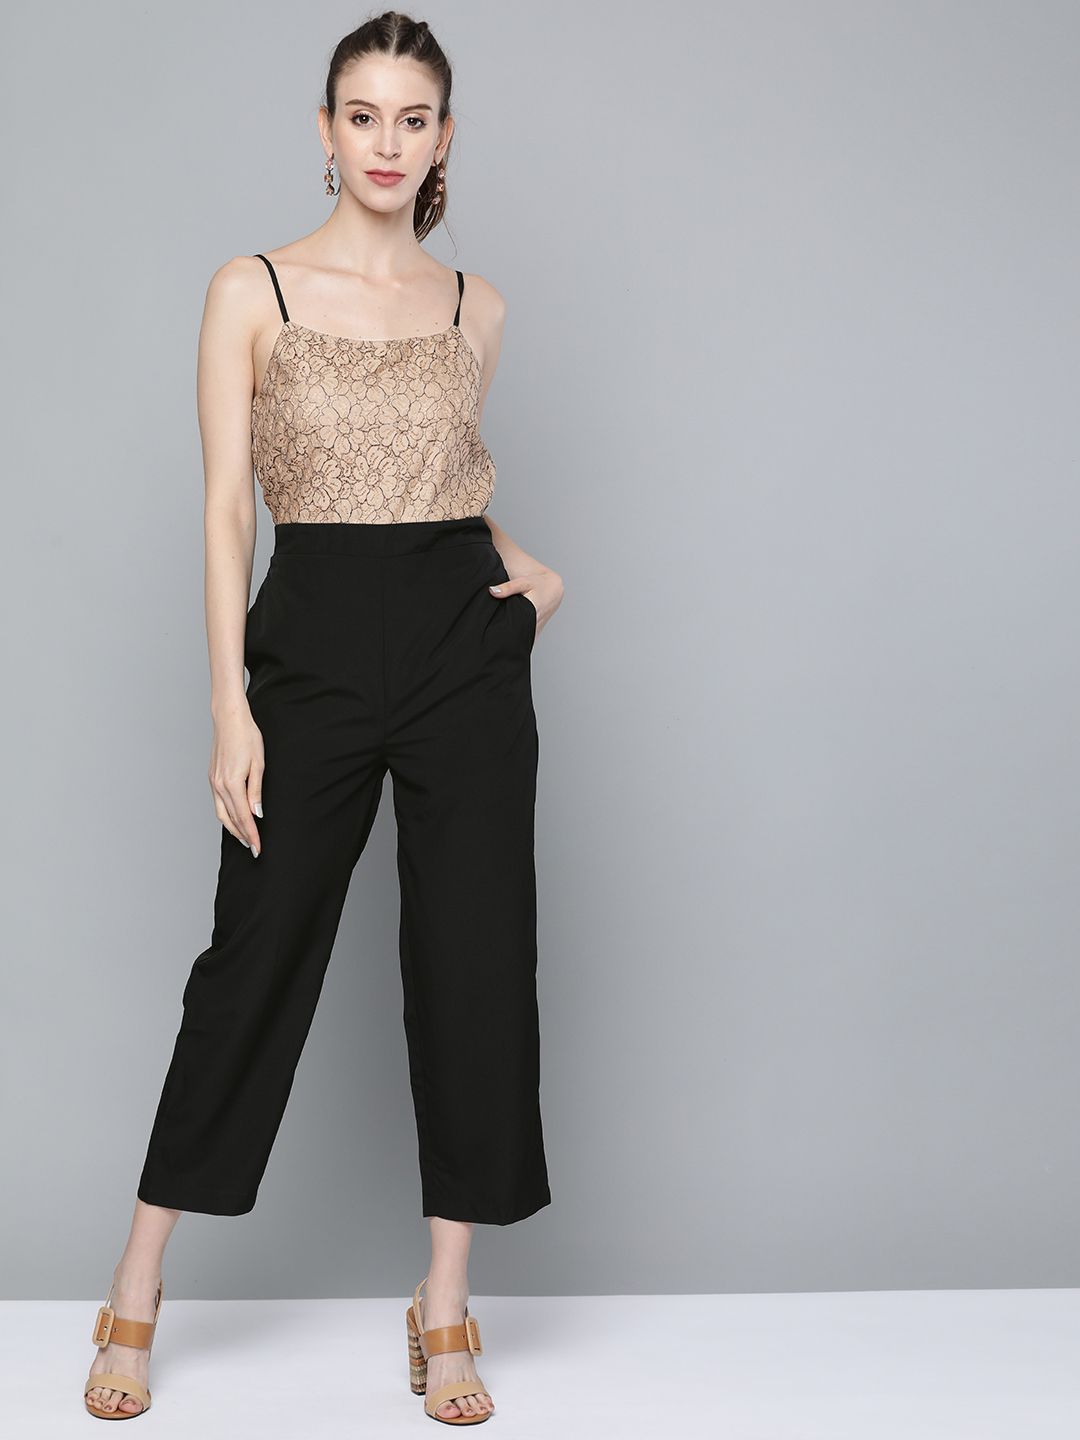 SASSAFRAS Beige & Black Basic Jumpsuit with Lace Inserts Price in India